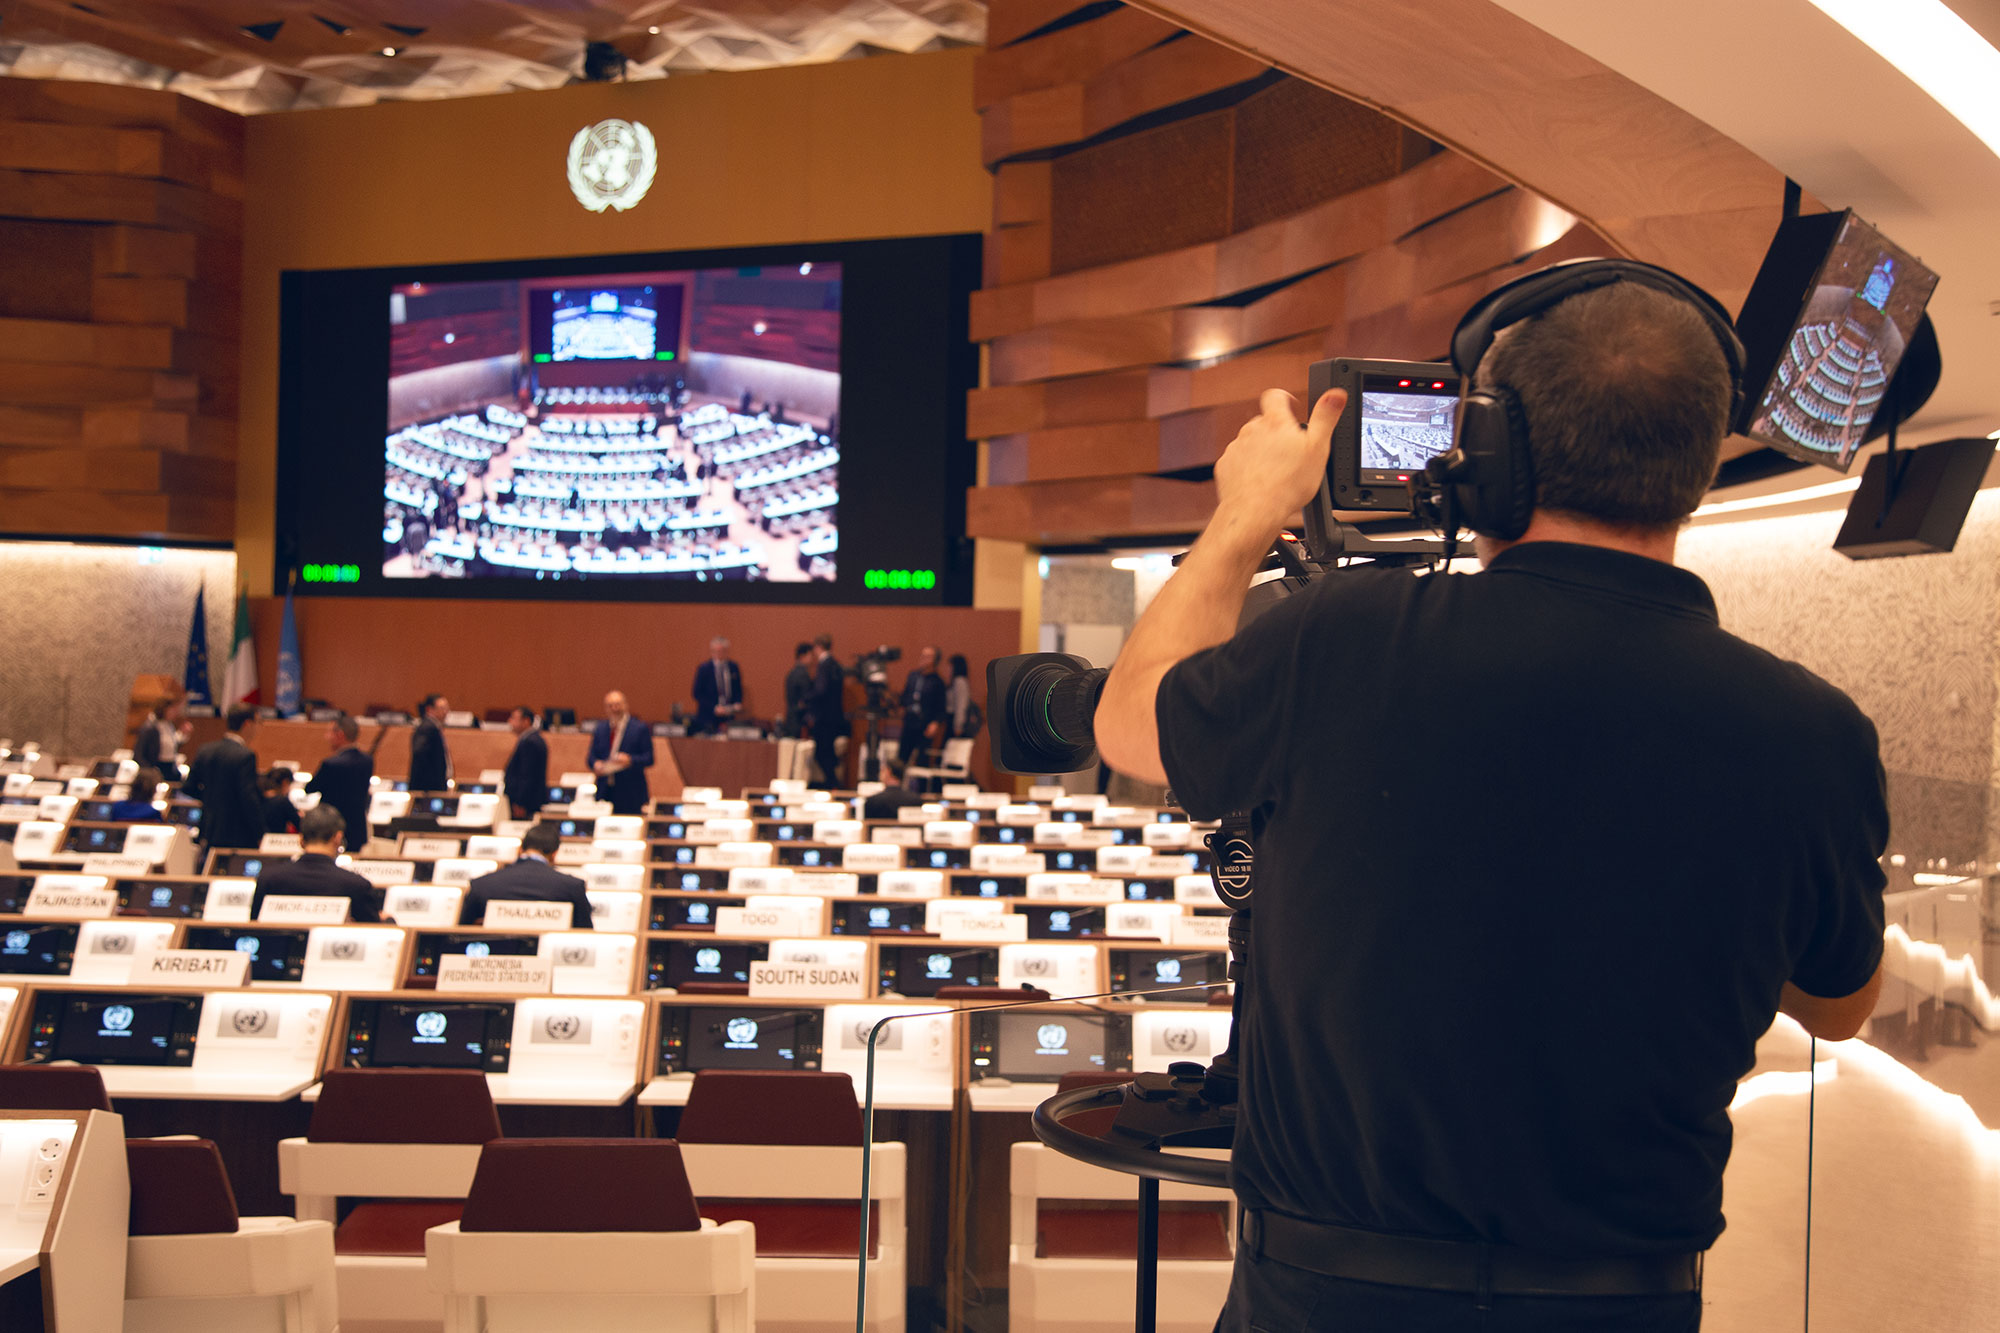 A photo from the back of a large conference room. At the front of the room, above the podium, is a large screen showing a shot of the conference room. People are mingling near the podium and first rows of desks and chairs. In the foreground of the photo, facing away, is a man operating a video camera and wearing headphones. 